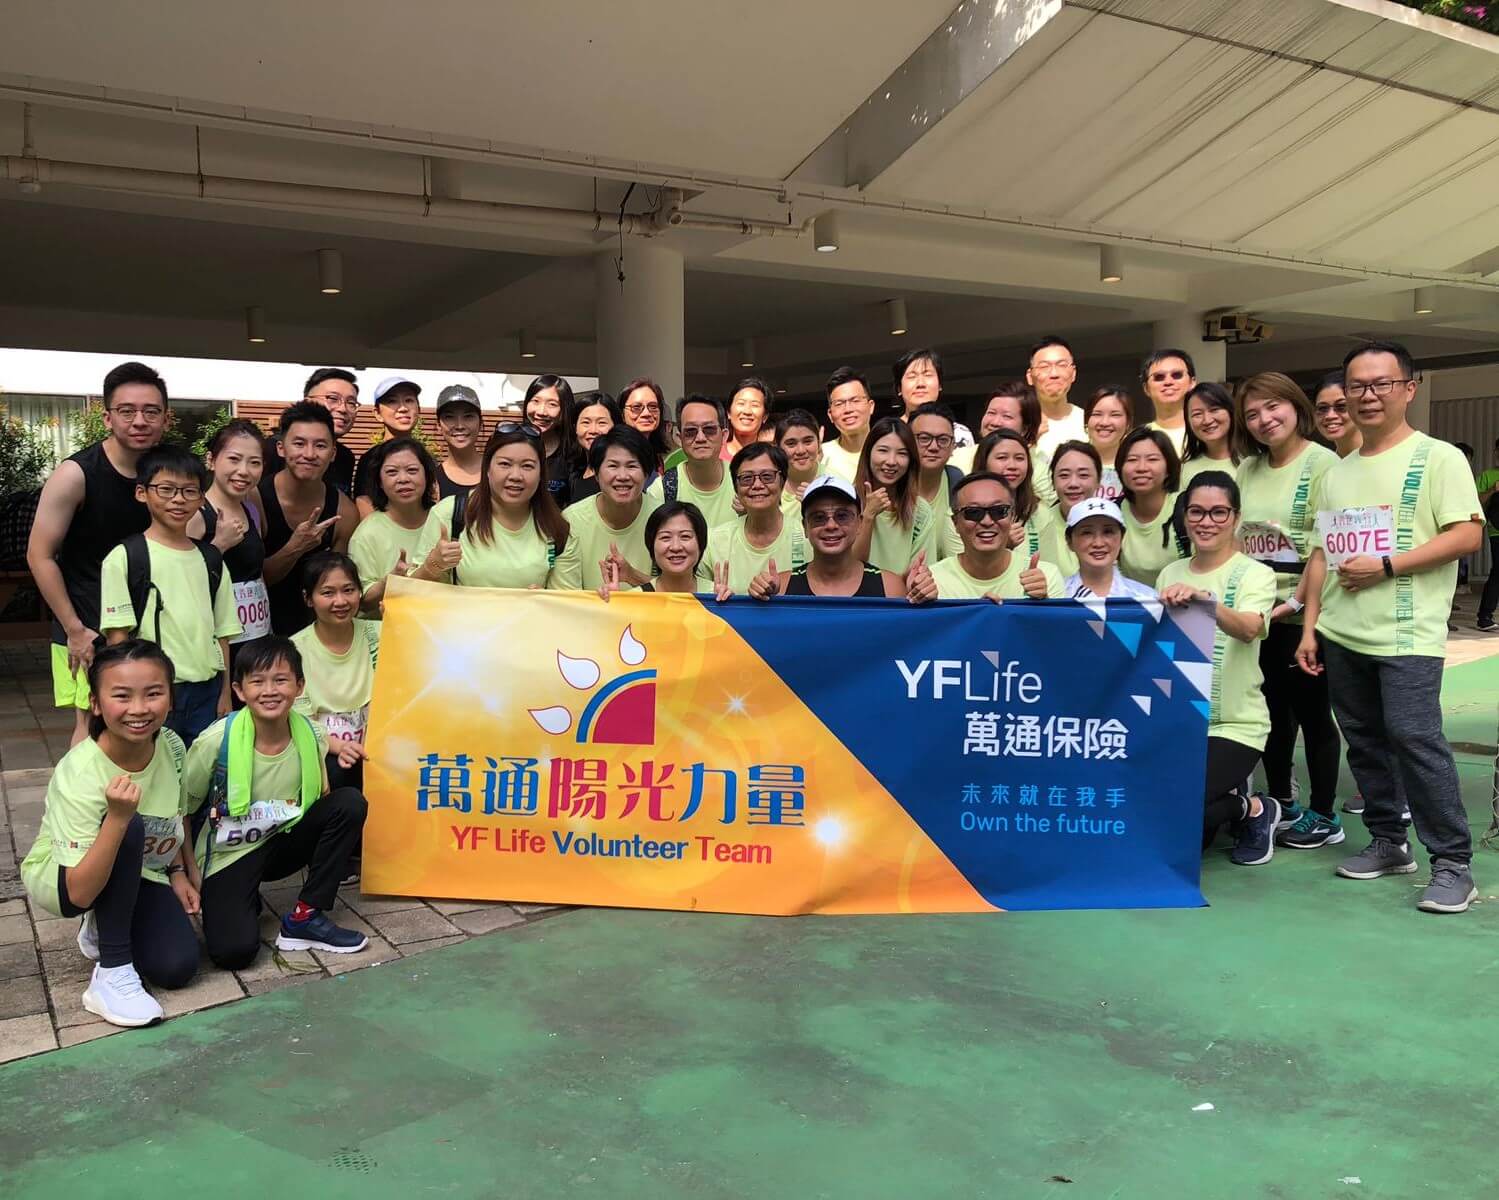 YF Life Volunteer Team fully supported the “AVS Charity Run & Walk for Volunteering 2019”, and helped to spread the spirit of volunteerism to the community. 